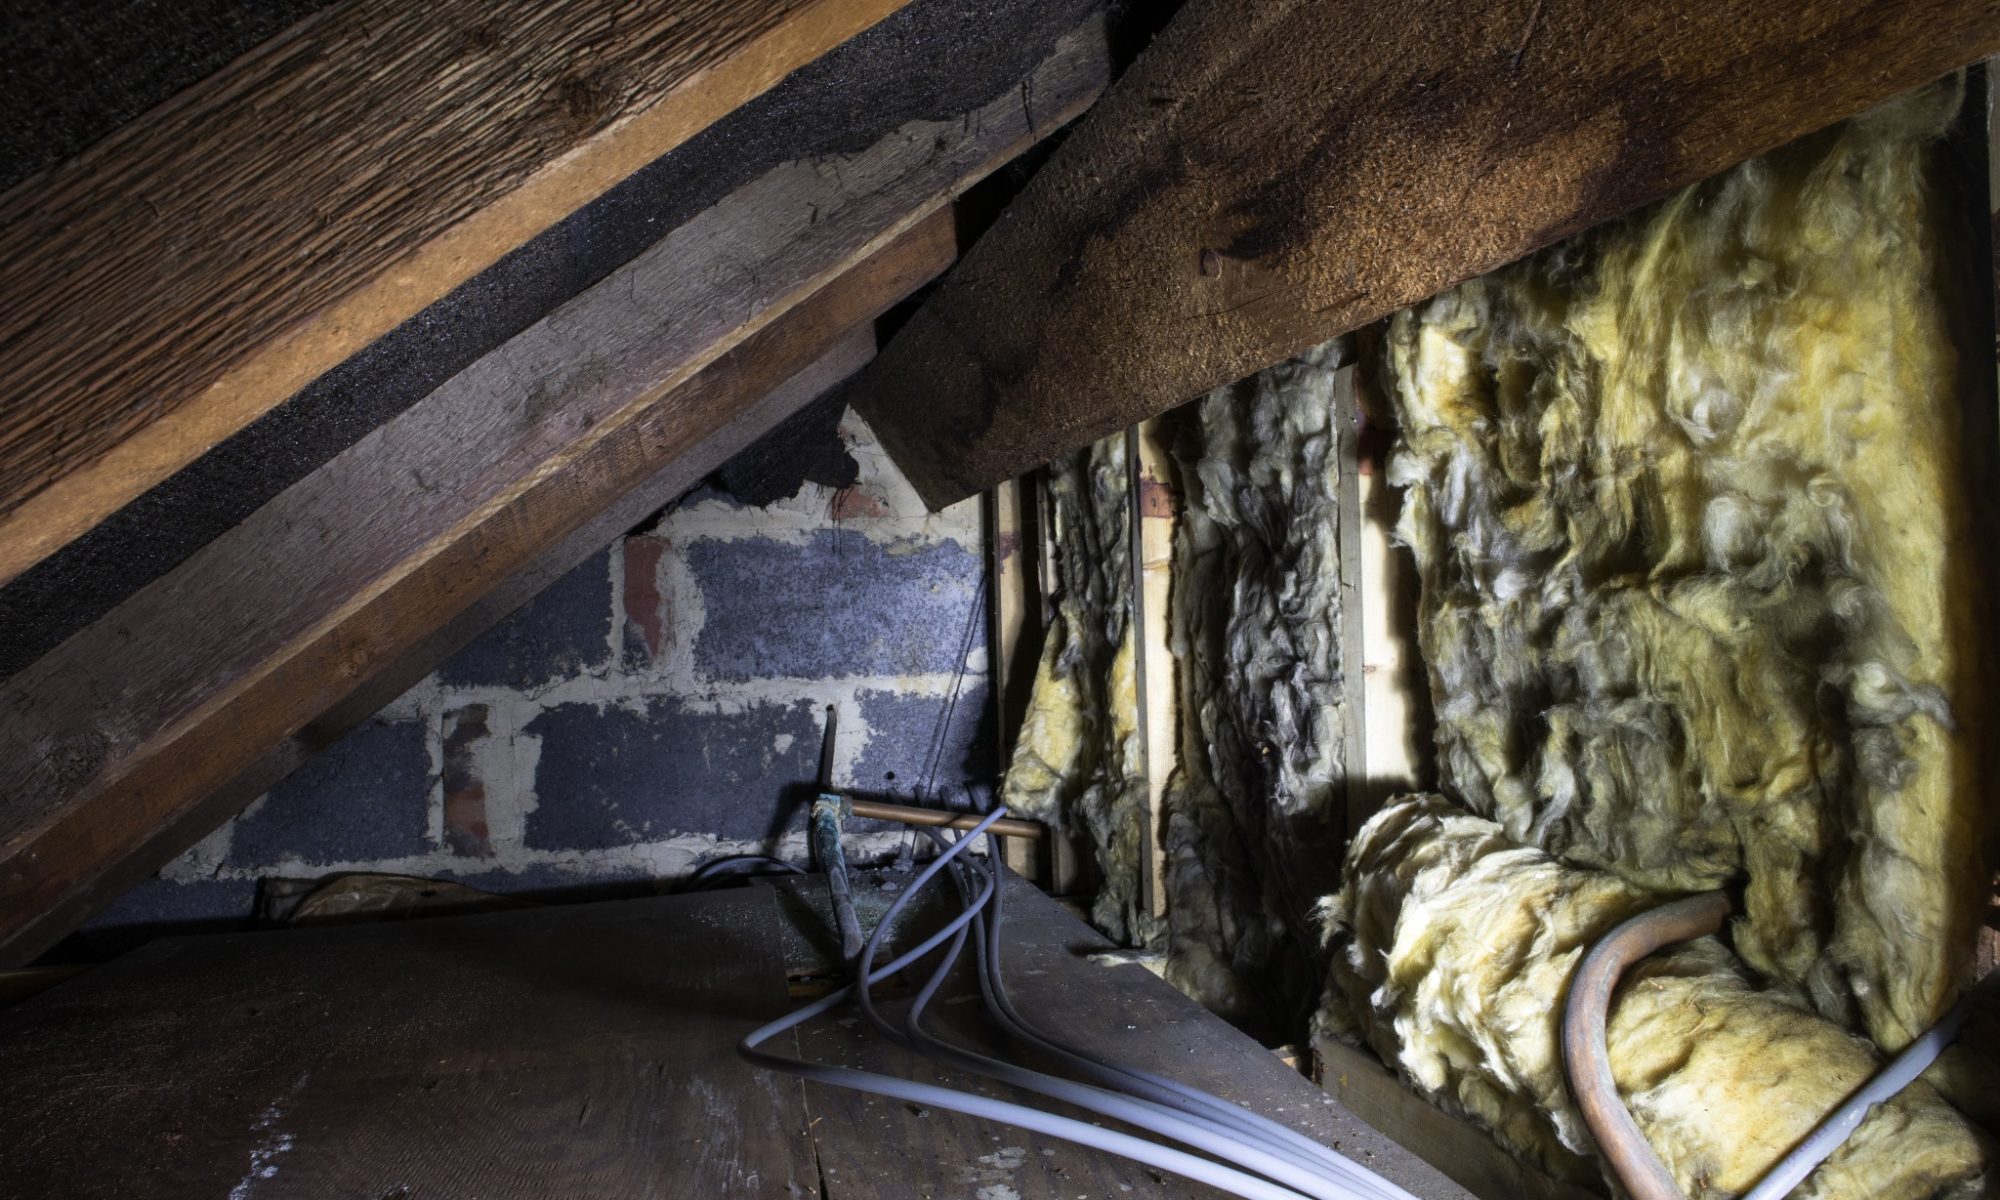 A crawl space with wooden beams and yellow insulation.